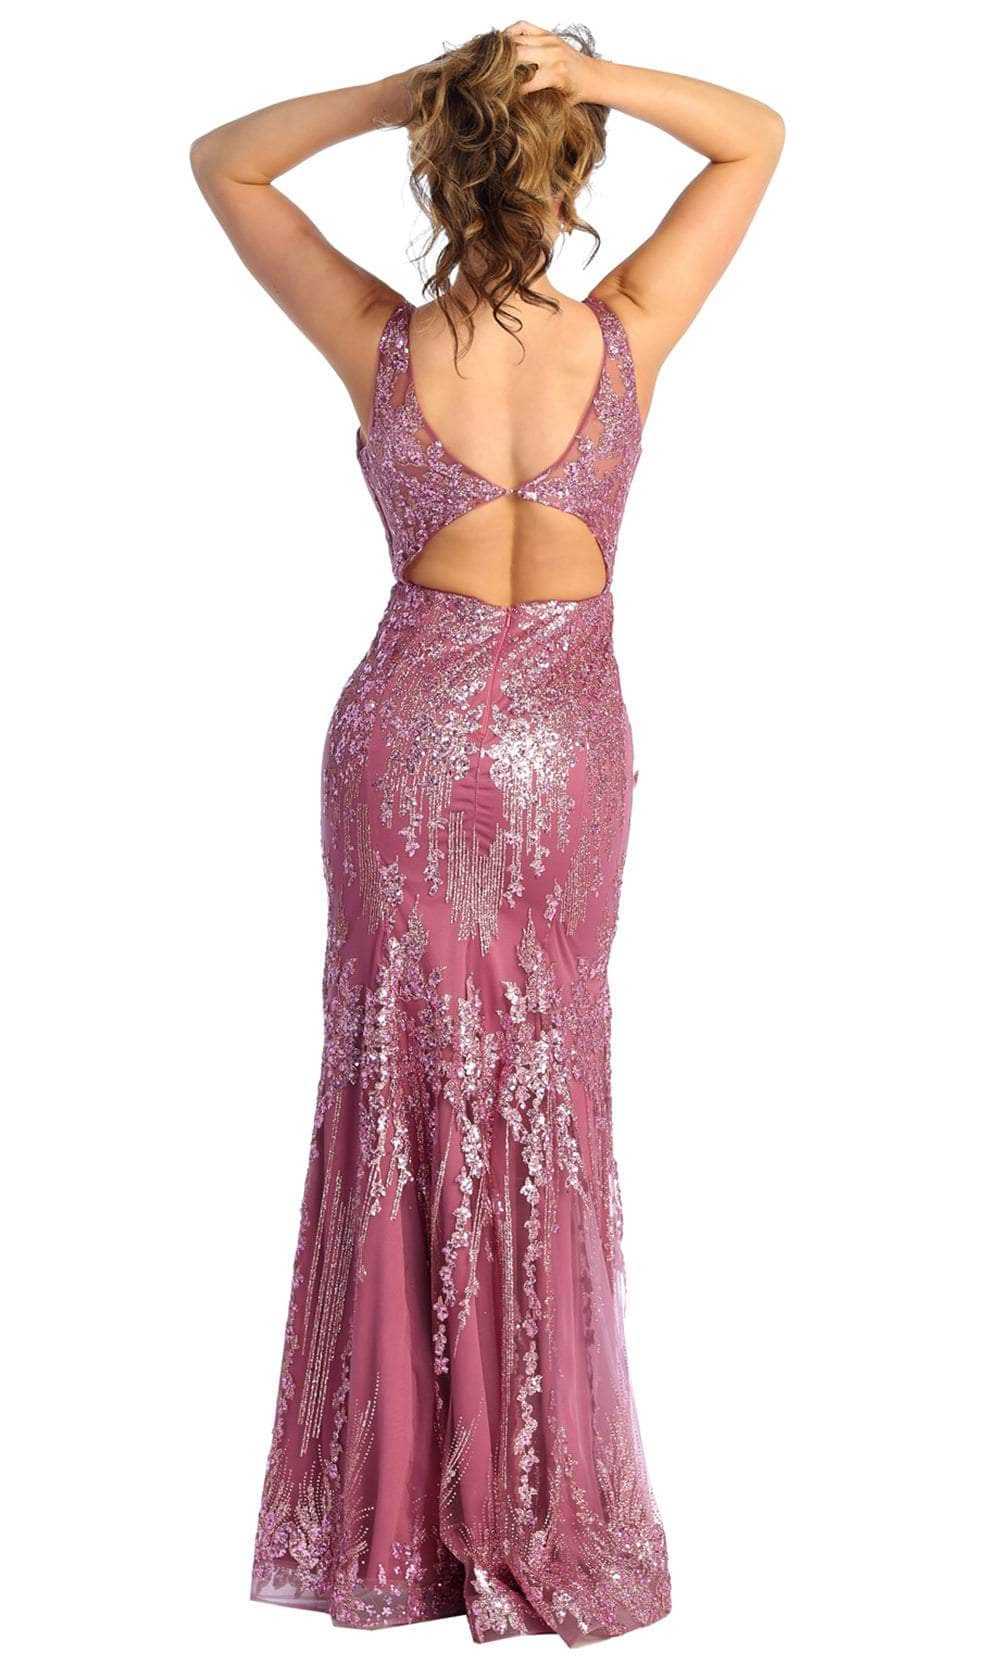 May Queen, May Queen RQ7941 - Sequined Cut-out Evening Dress